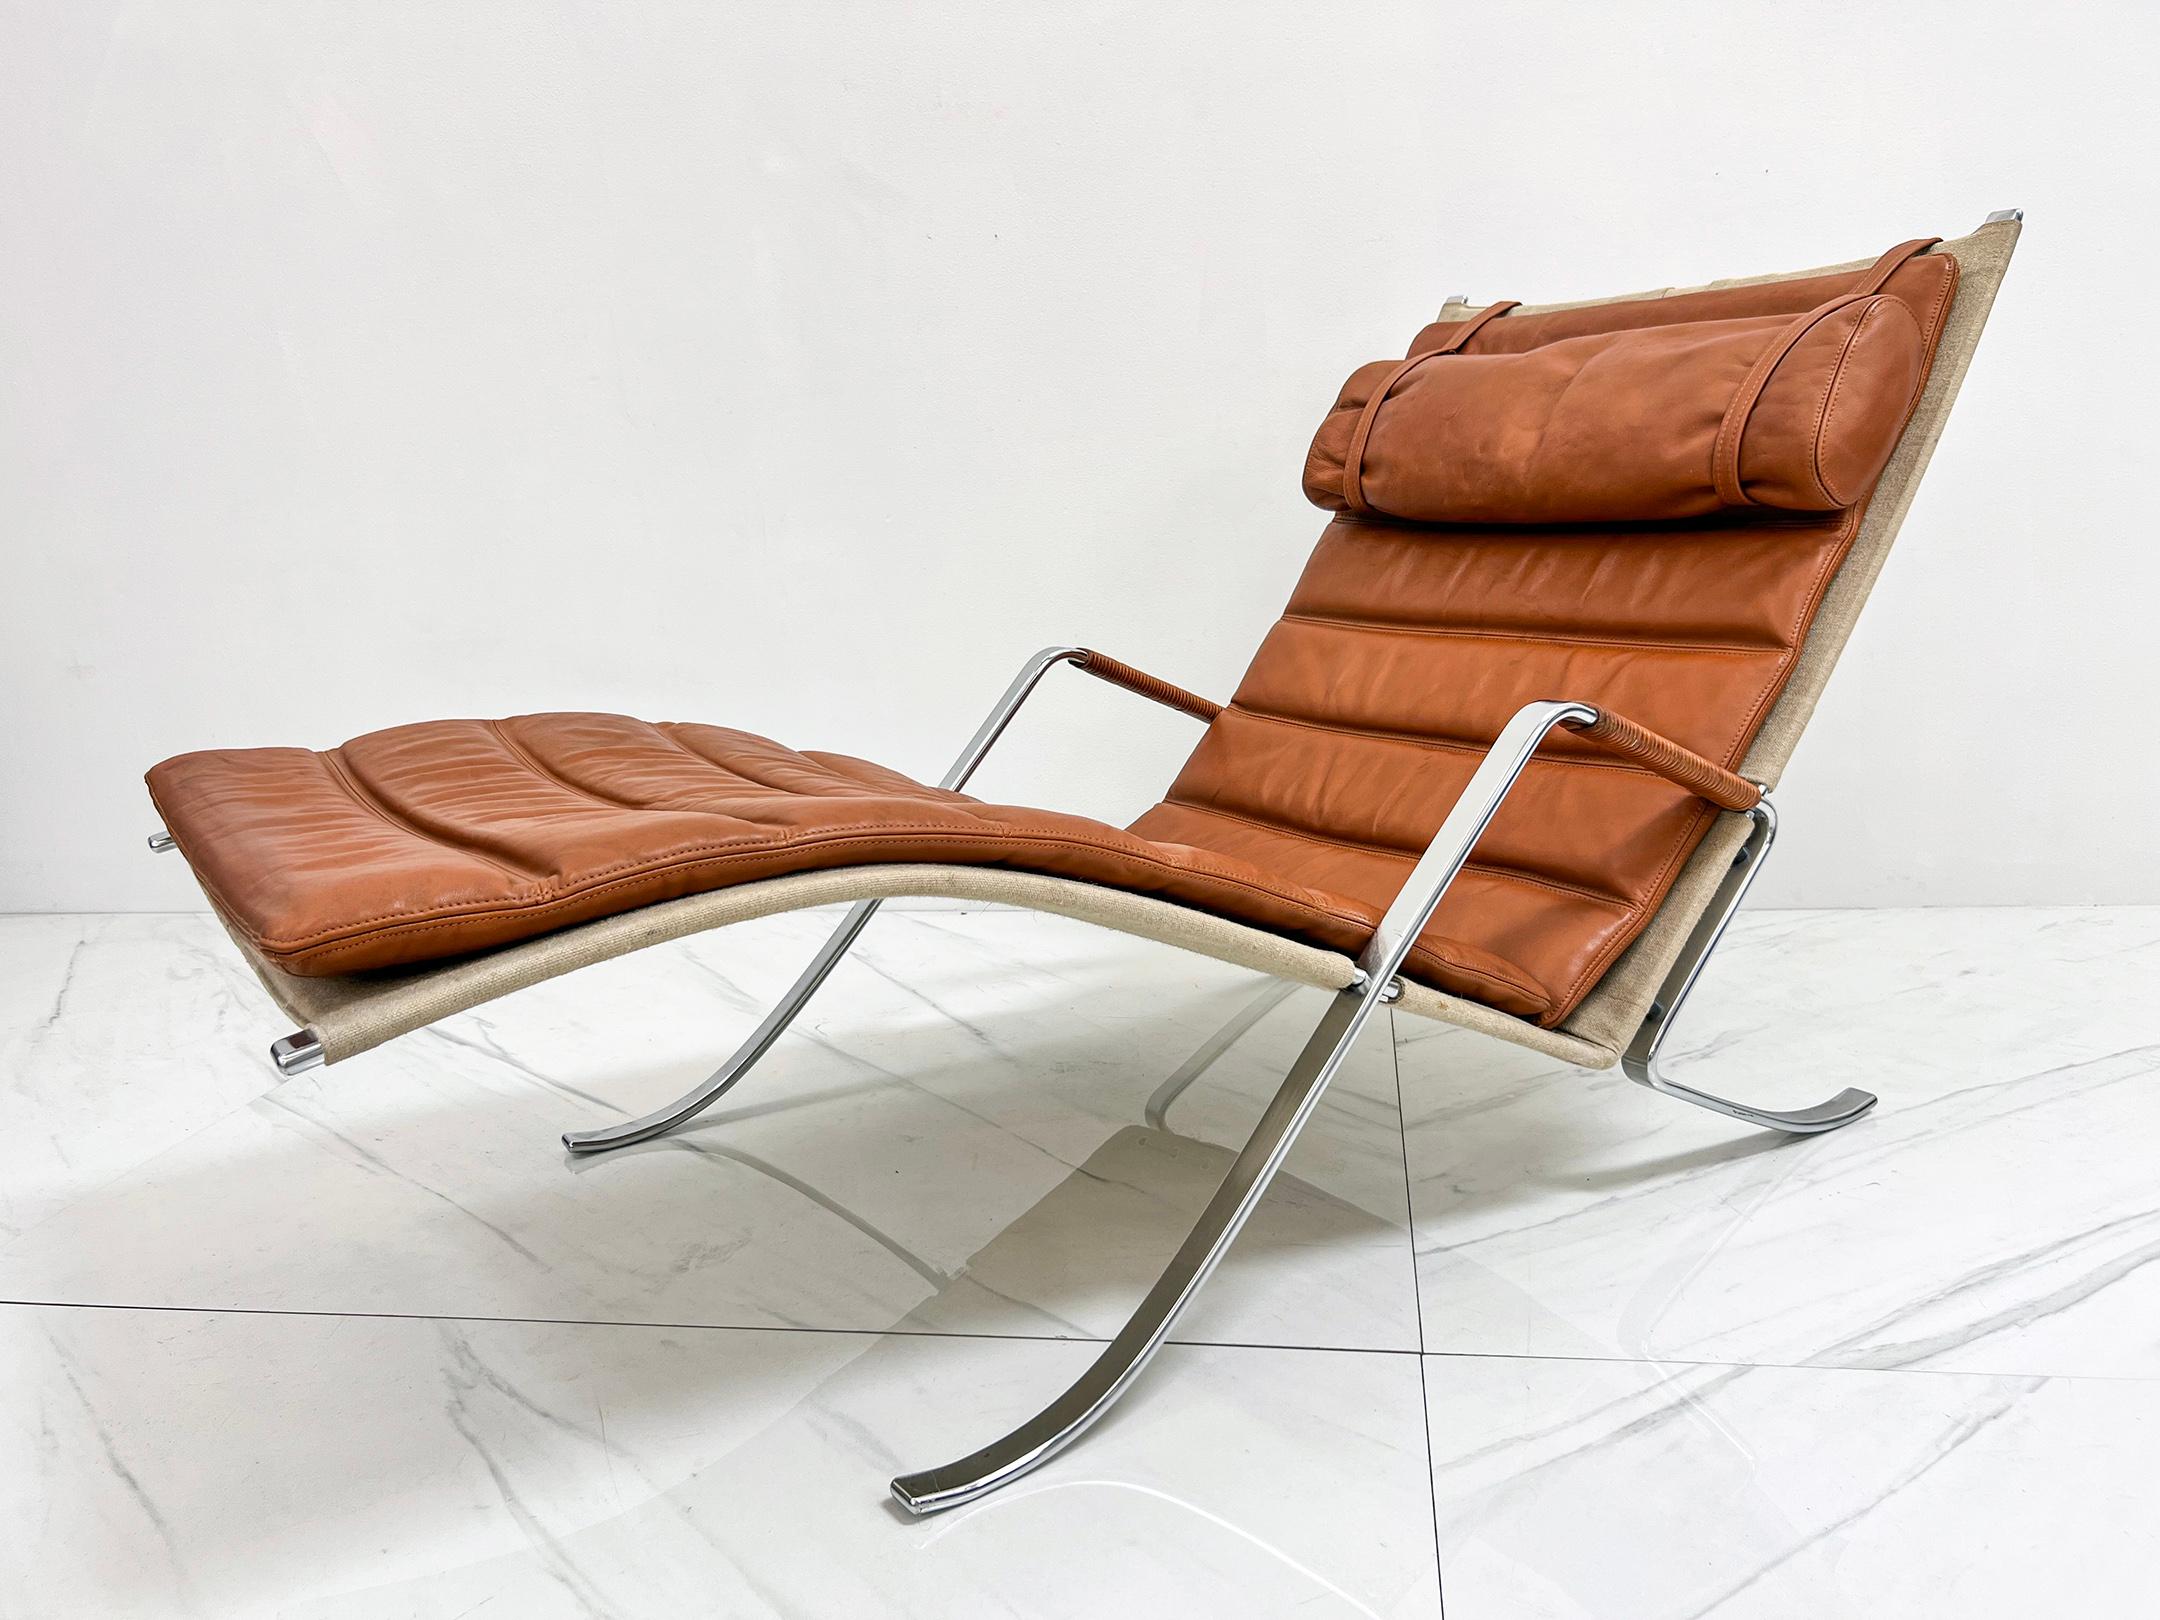 Steel FK-87 Grasshopper Chaise Lounge by Fabricius & Kastholm for Alfred Kill, 1960s  For Sale